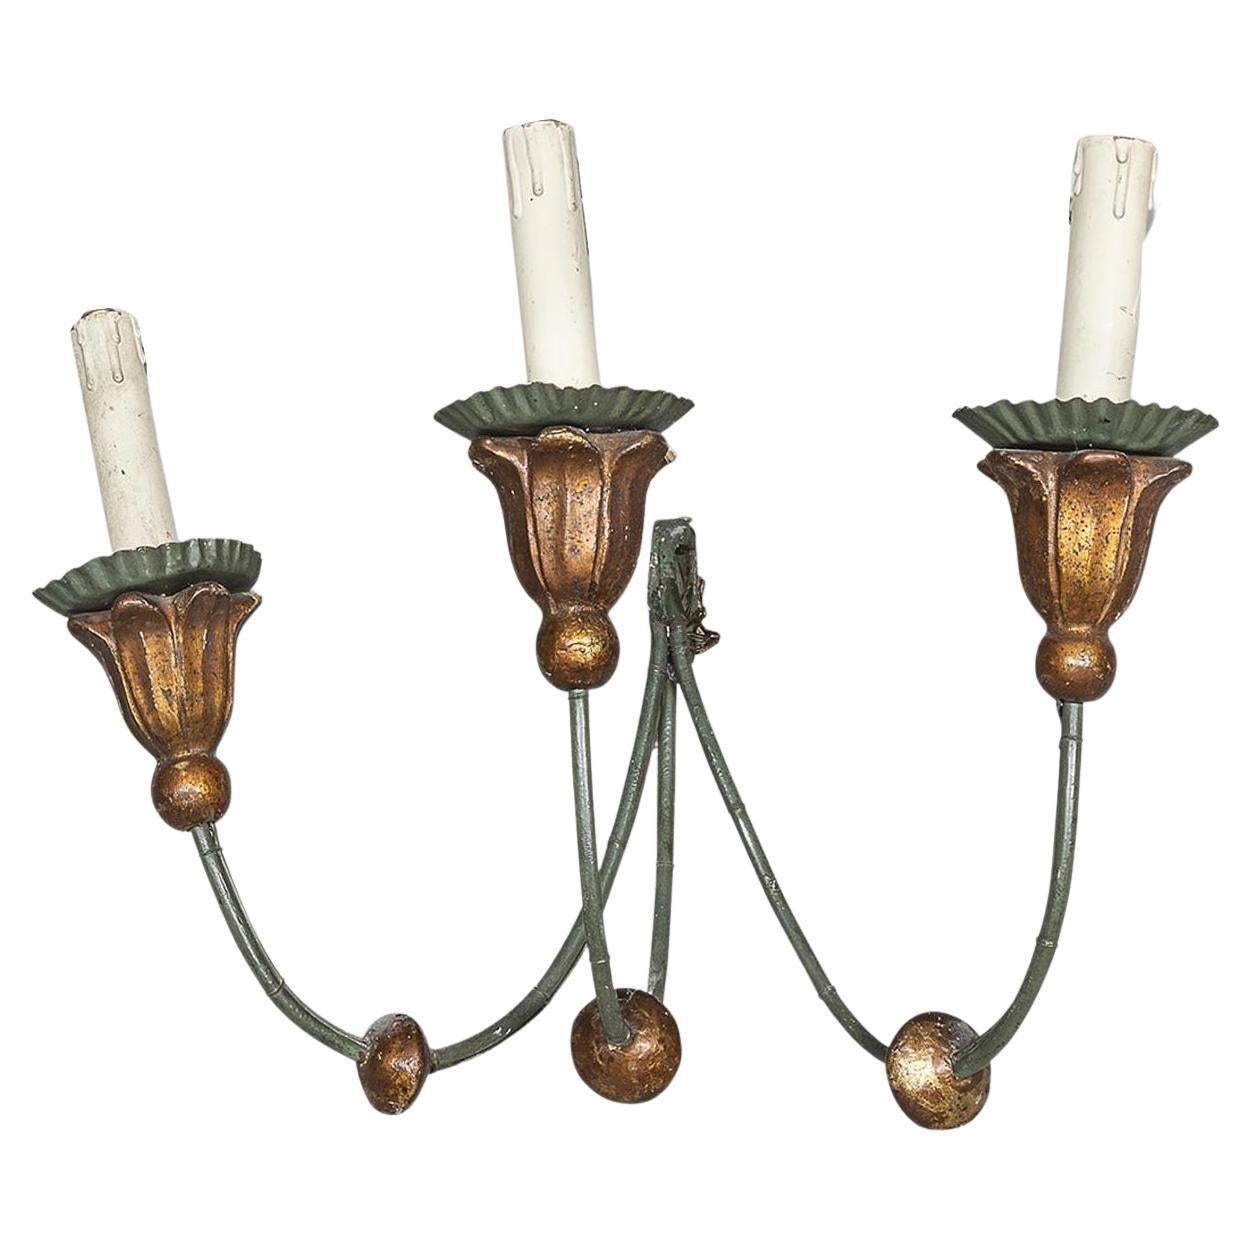 Anonymous
19th century; Europe
Iron and gilt wood

Approximate size: 9.5 (h) x 15 (w) x 9.75 (d) inches

A collection of five eloquent antique European wall lights in the form of 3-light candlesticks. The iron armatures are painted with a green